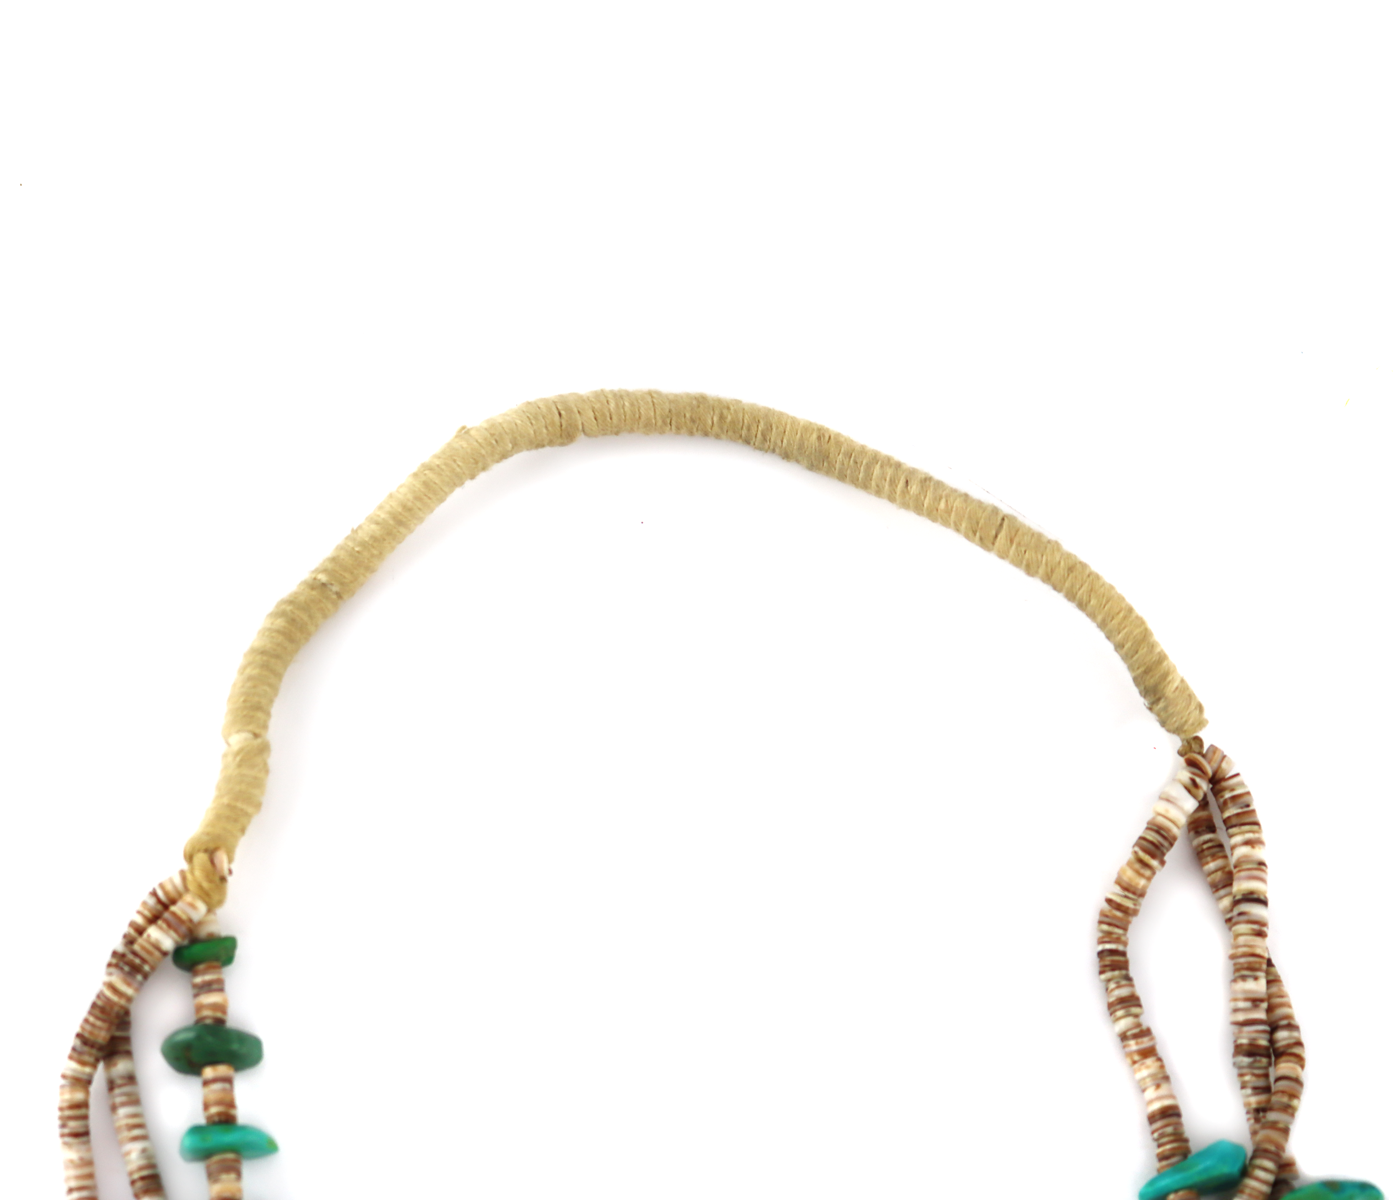 Navajo - 3-Strand Turquoise Nugget, Spiny Oyster, Coral, and Heishi Necklace with Jocla Pendants  c. 1920-40s, length 32" (J15987-023)